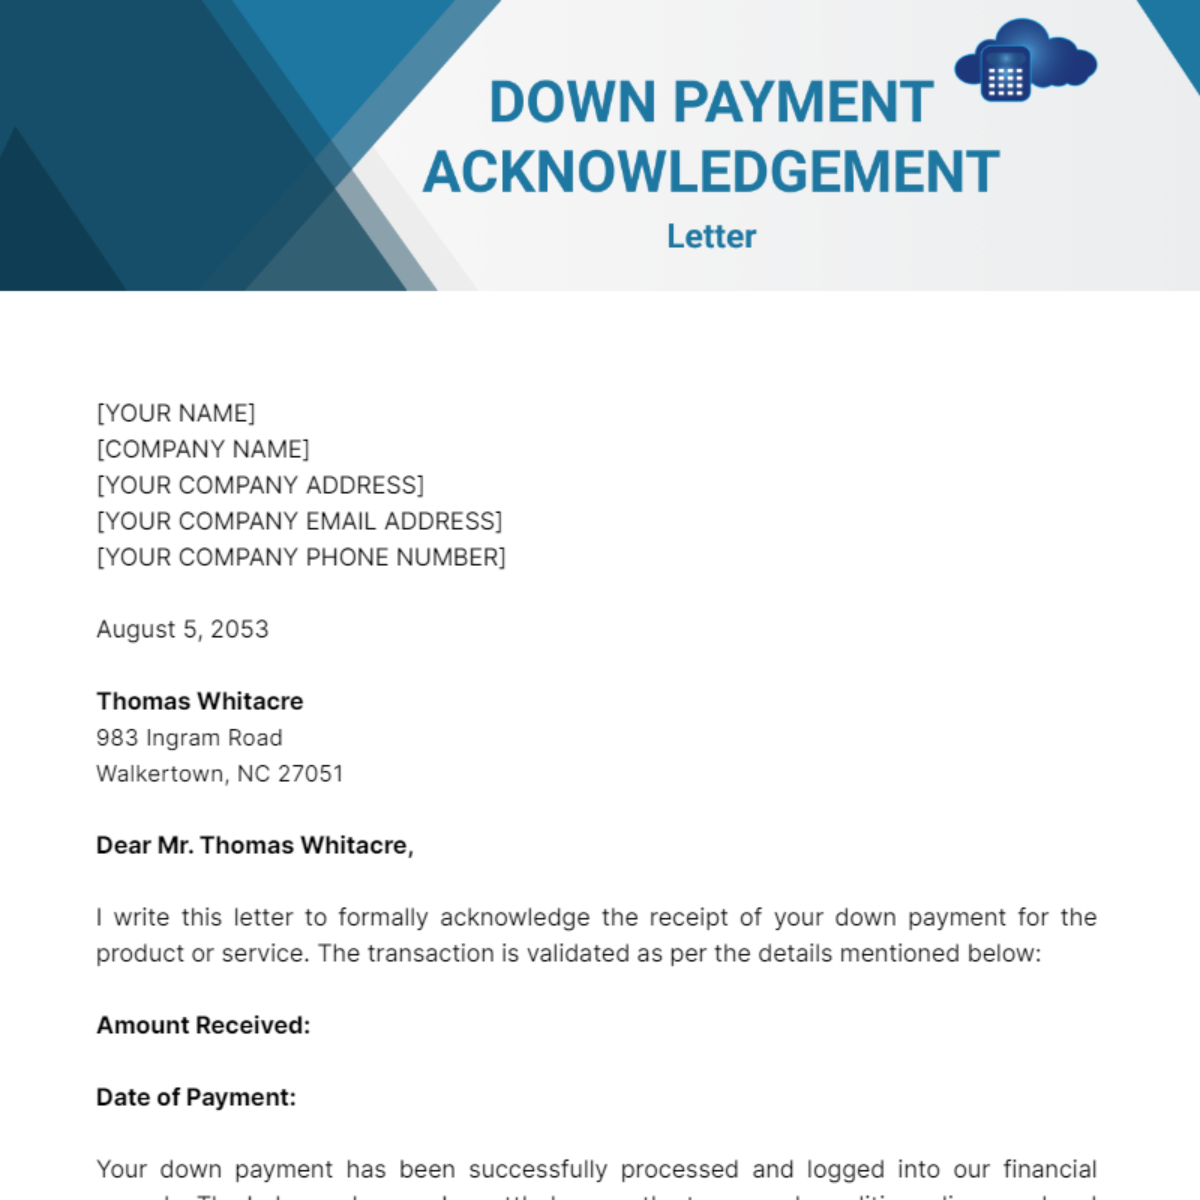 Down Payment Acknowledgment Letter Template